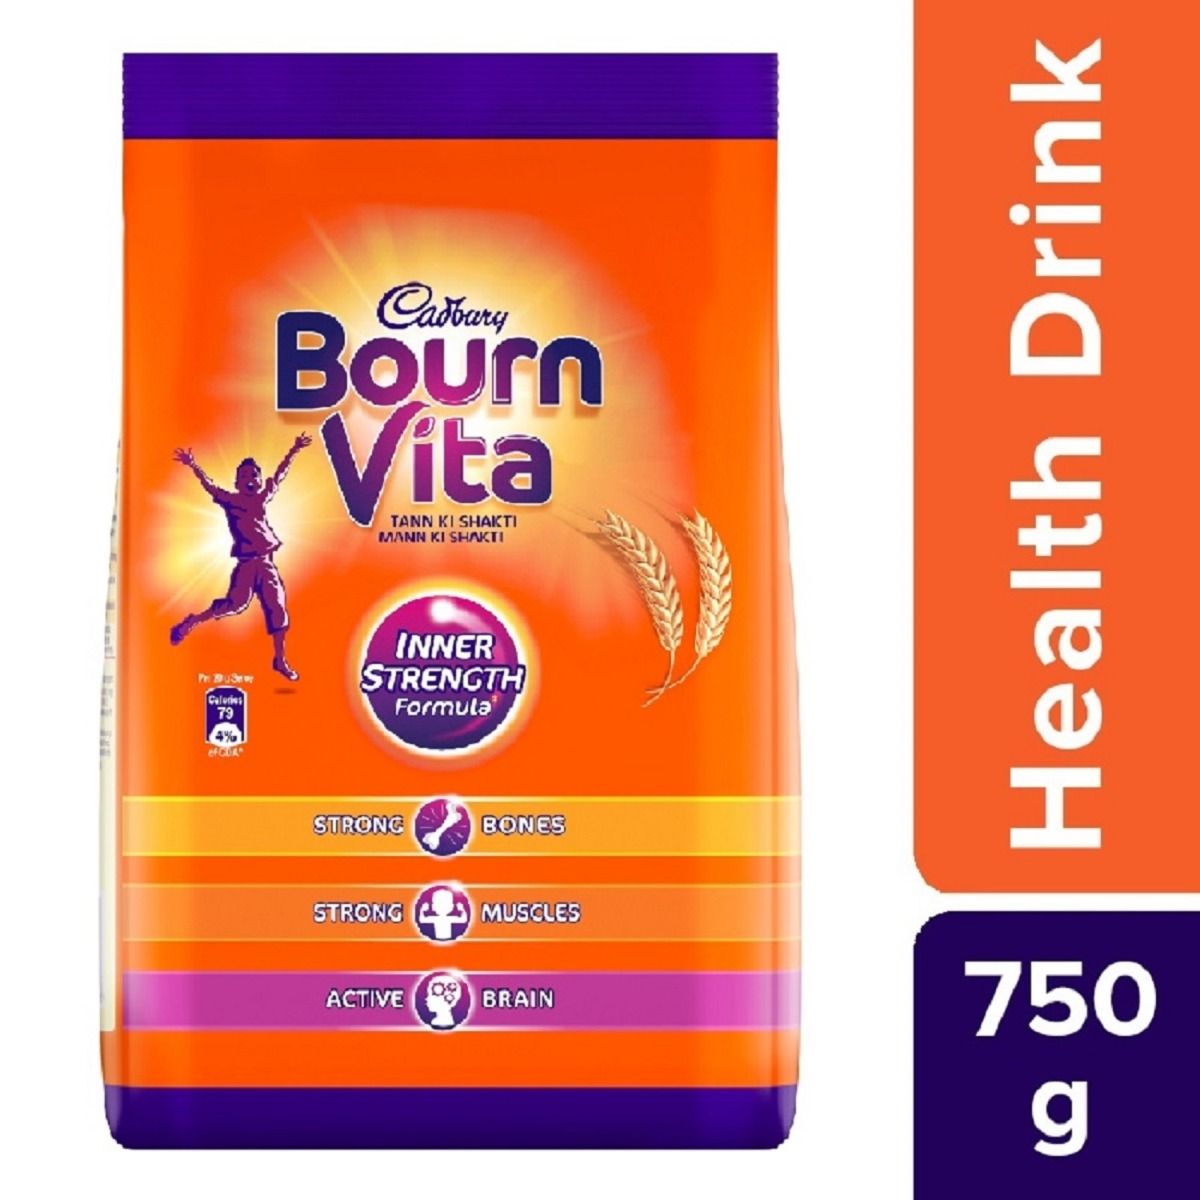 Bournvita Nutrition Drink, 750 gm Refill Pack, Pack of 1 